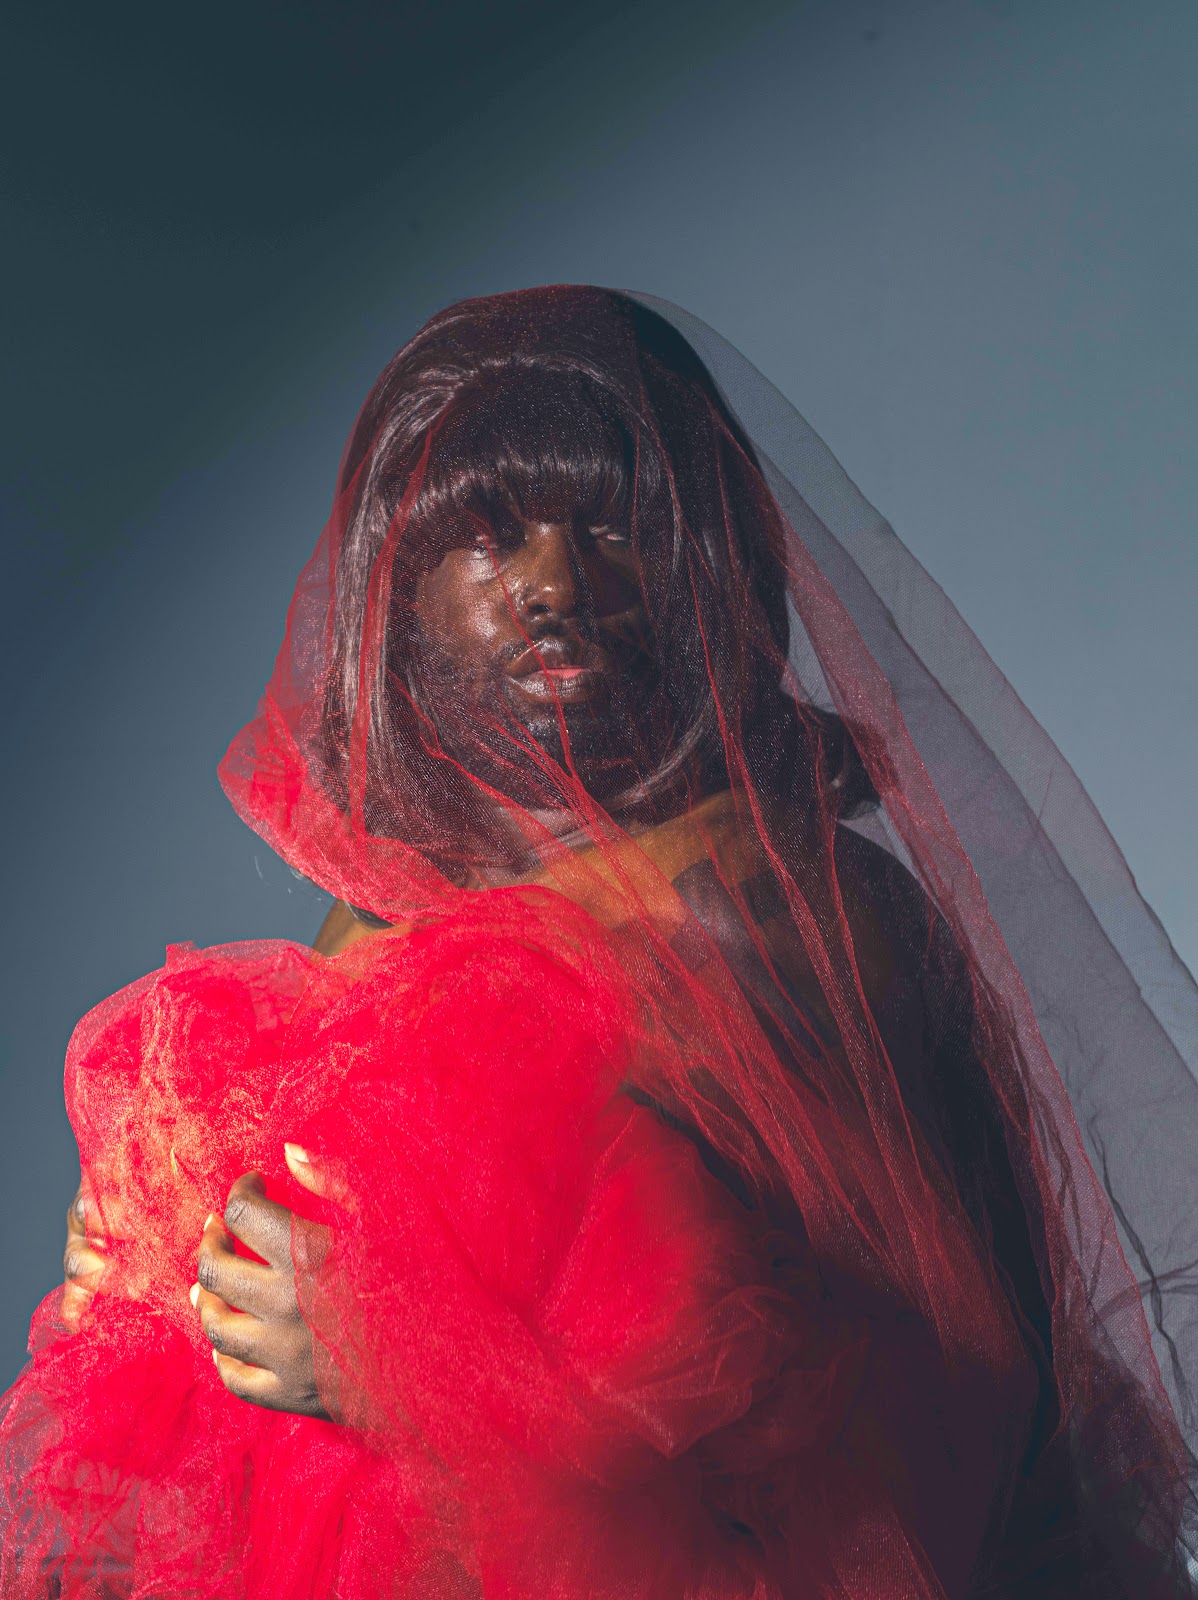 Image right: Shabez Jamal, Anita in Red, 2023. A portrait of Anita against a dark gray and gradient background, glancing to the right, beyond the image frame. They are wrapped in bright red tulle with a thin layer covering their head like a veil. Photo courtesy of Shabez Jamal.